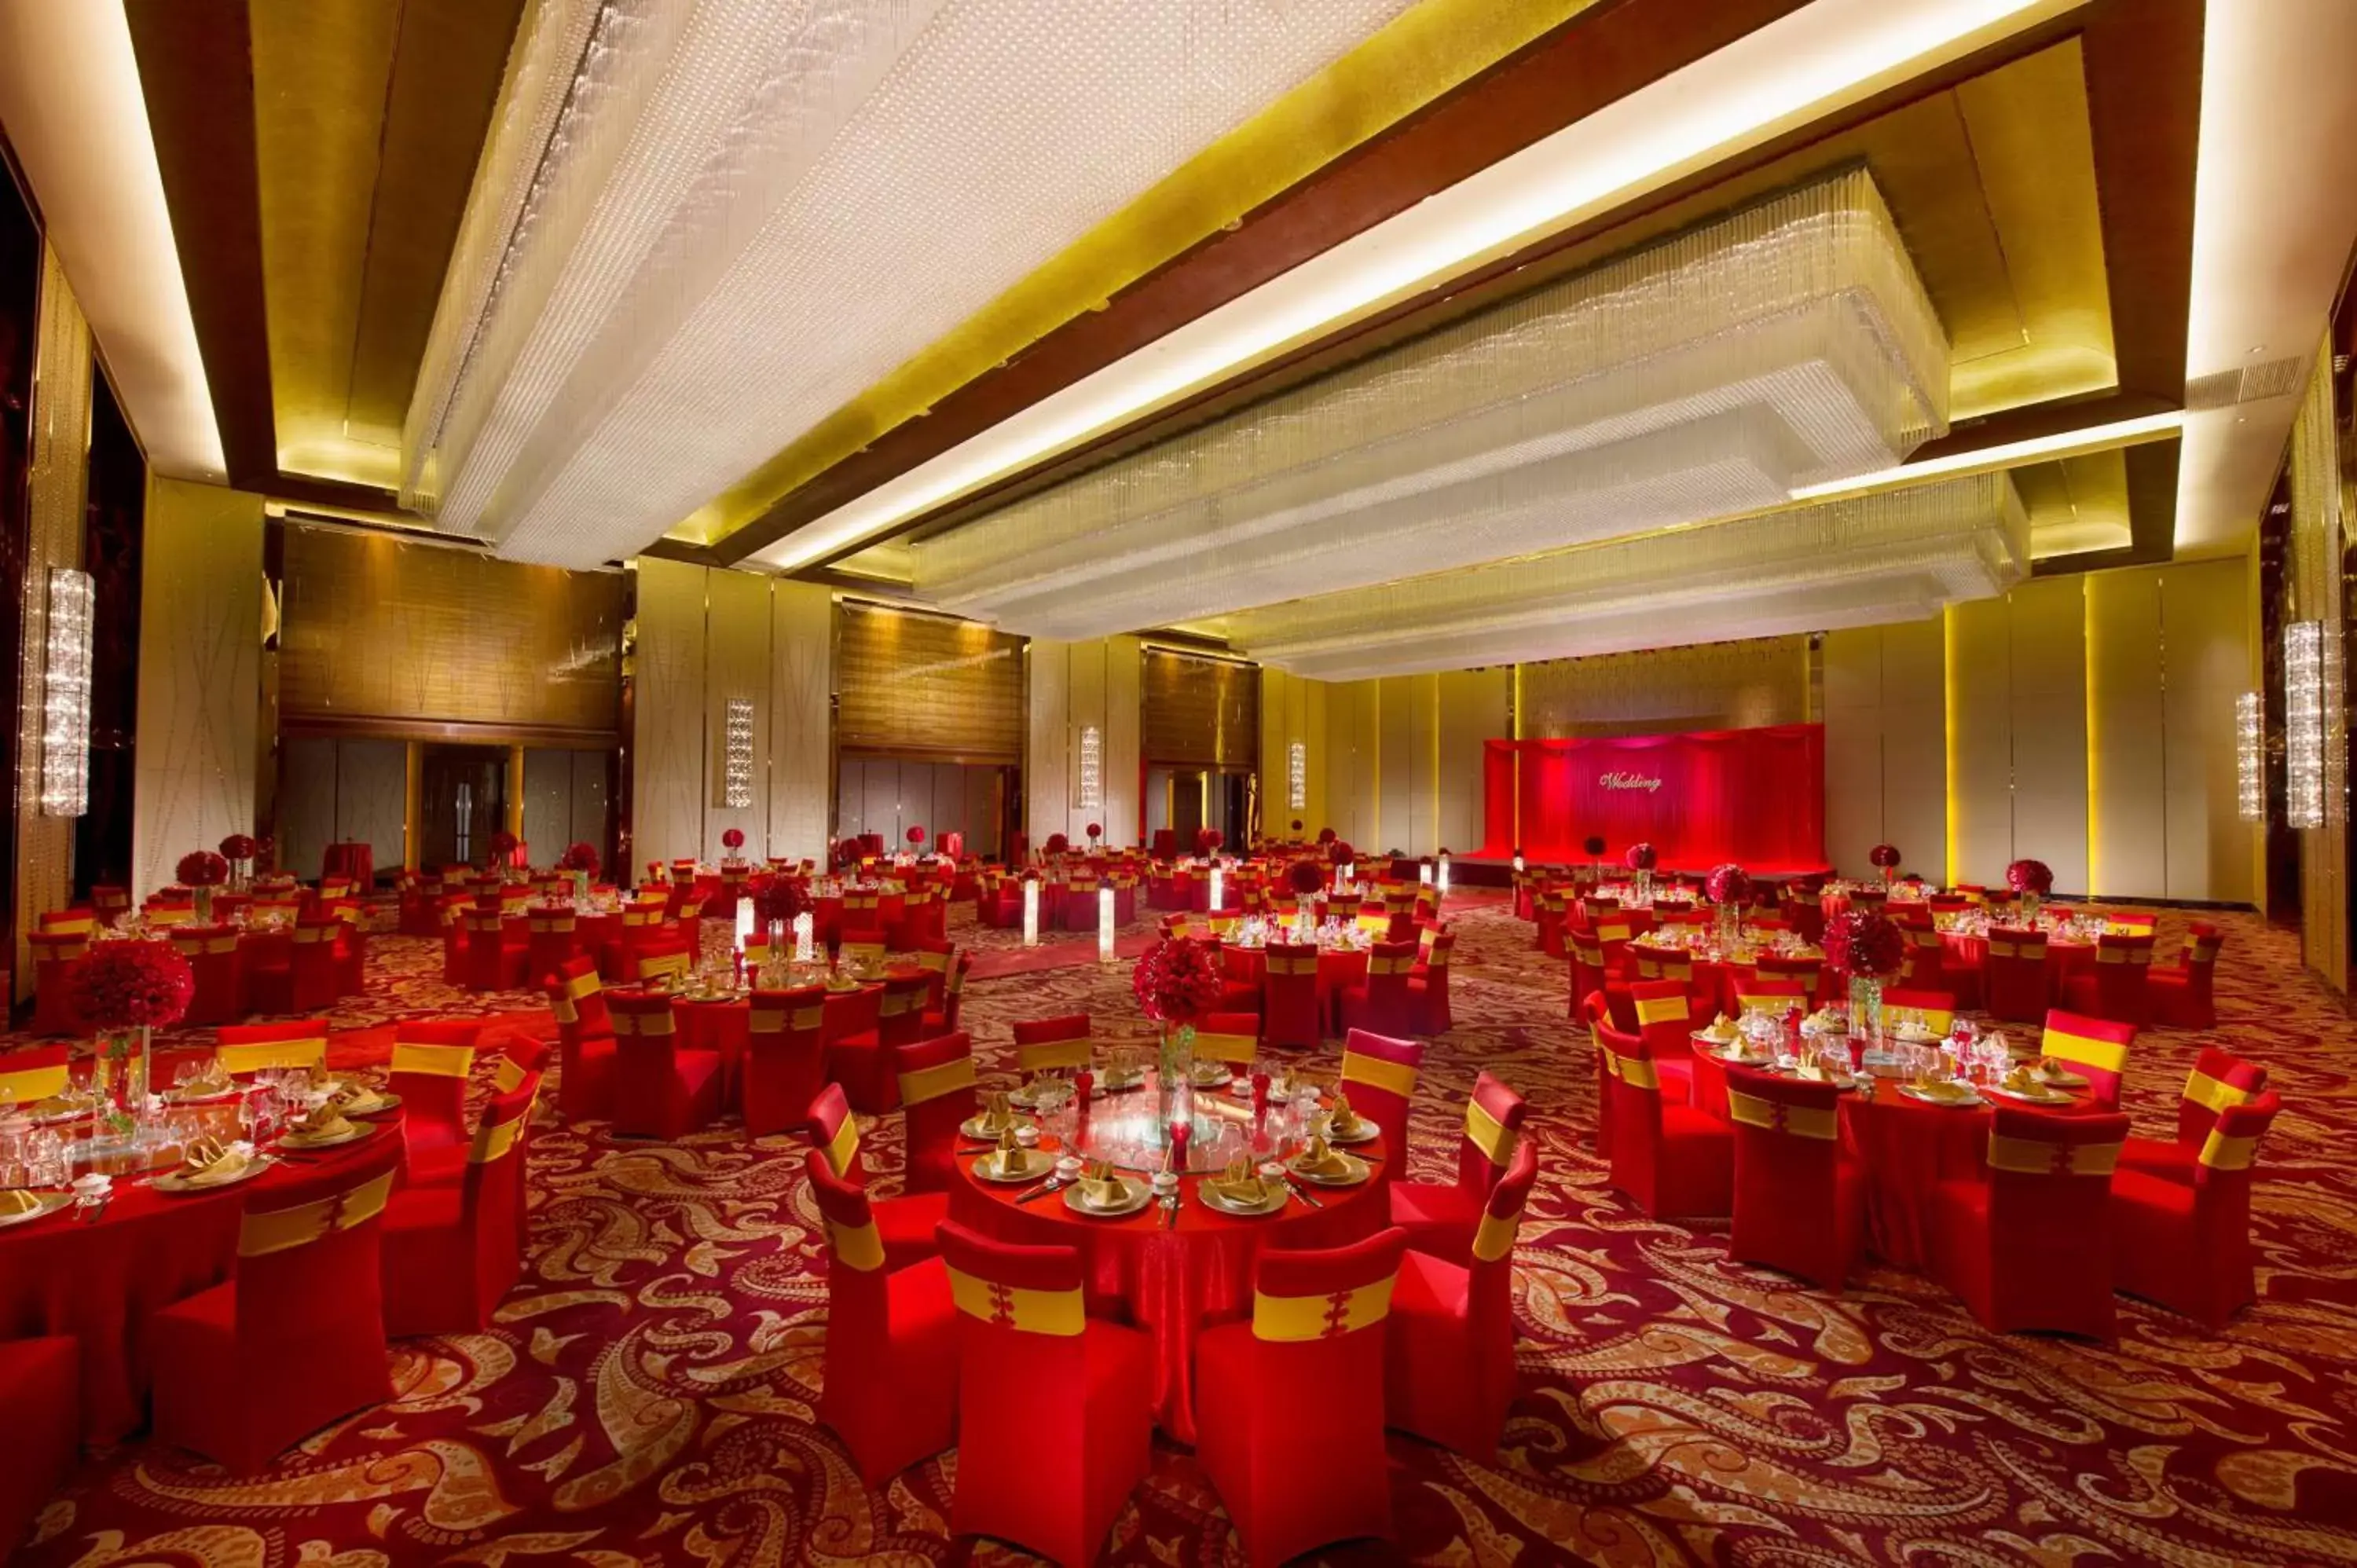 Meeting/conference room, Banquet Facilities in Hilton Zhongshan Downtown